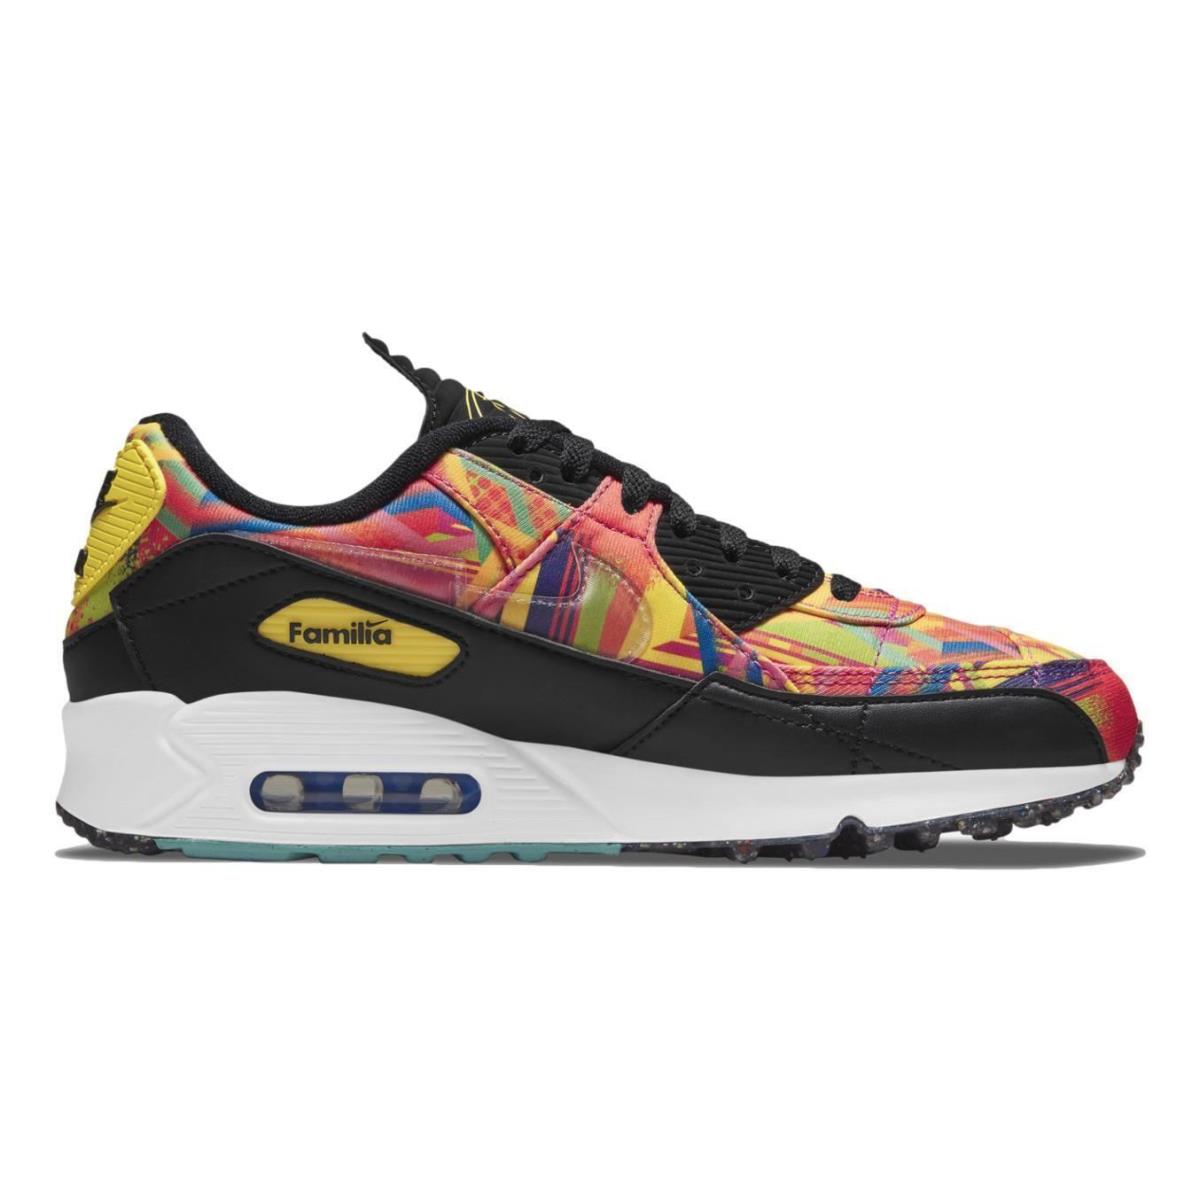 Nike Air Max 90 / Lhm `latino Heritage Month- Familia` Men`s Shoes DJ4703-900 - Multi-color/Fire Pink-Black